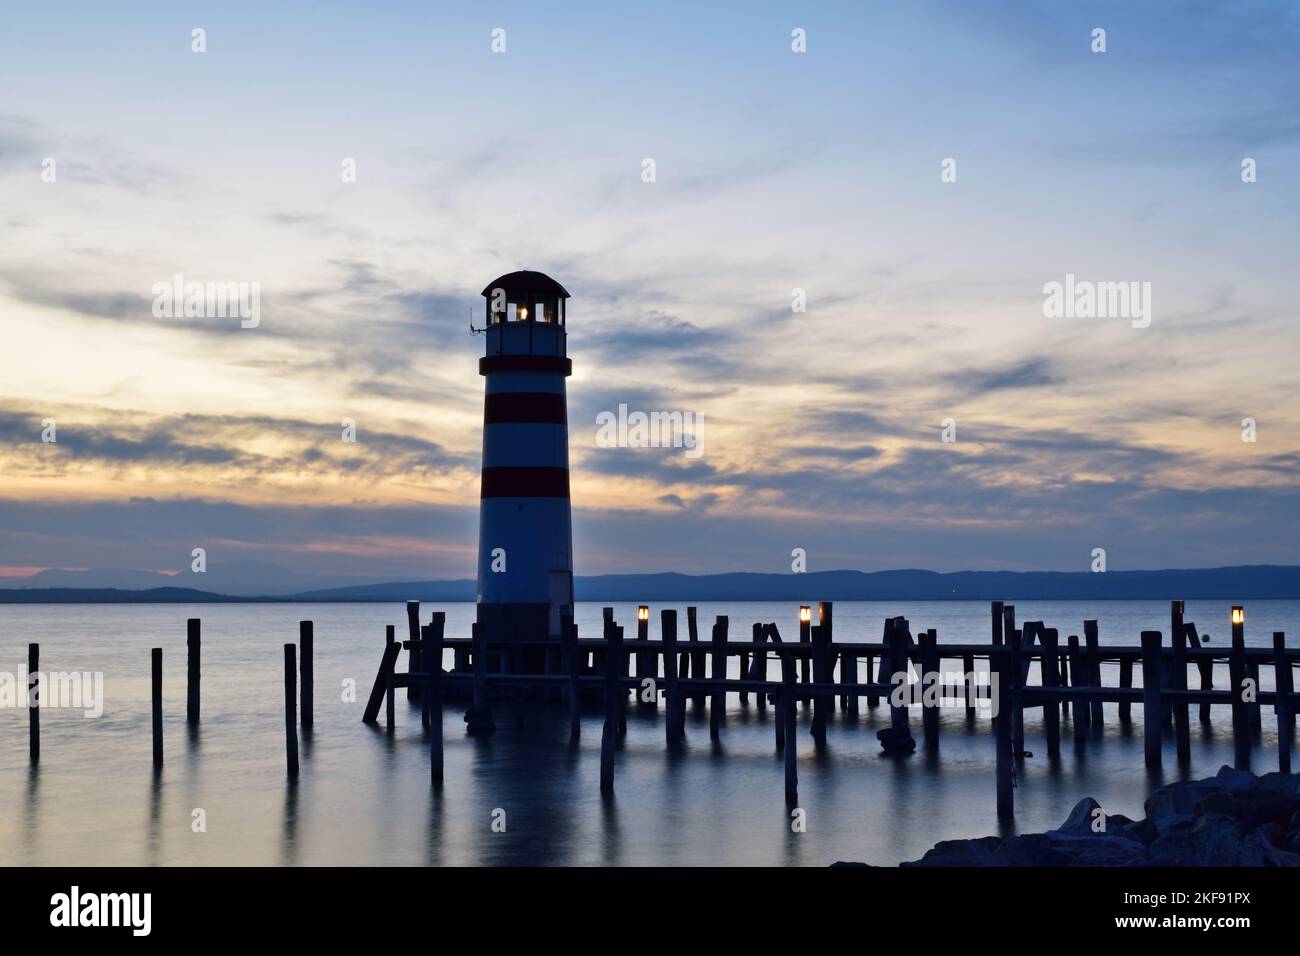 Lighthouse in Podersdorf, long exposure Stock Photo